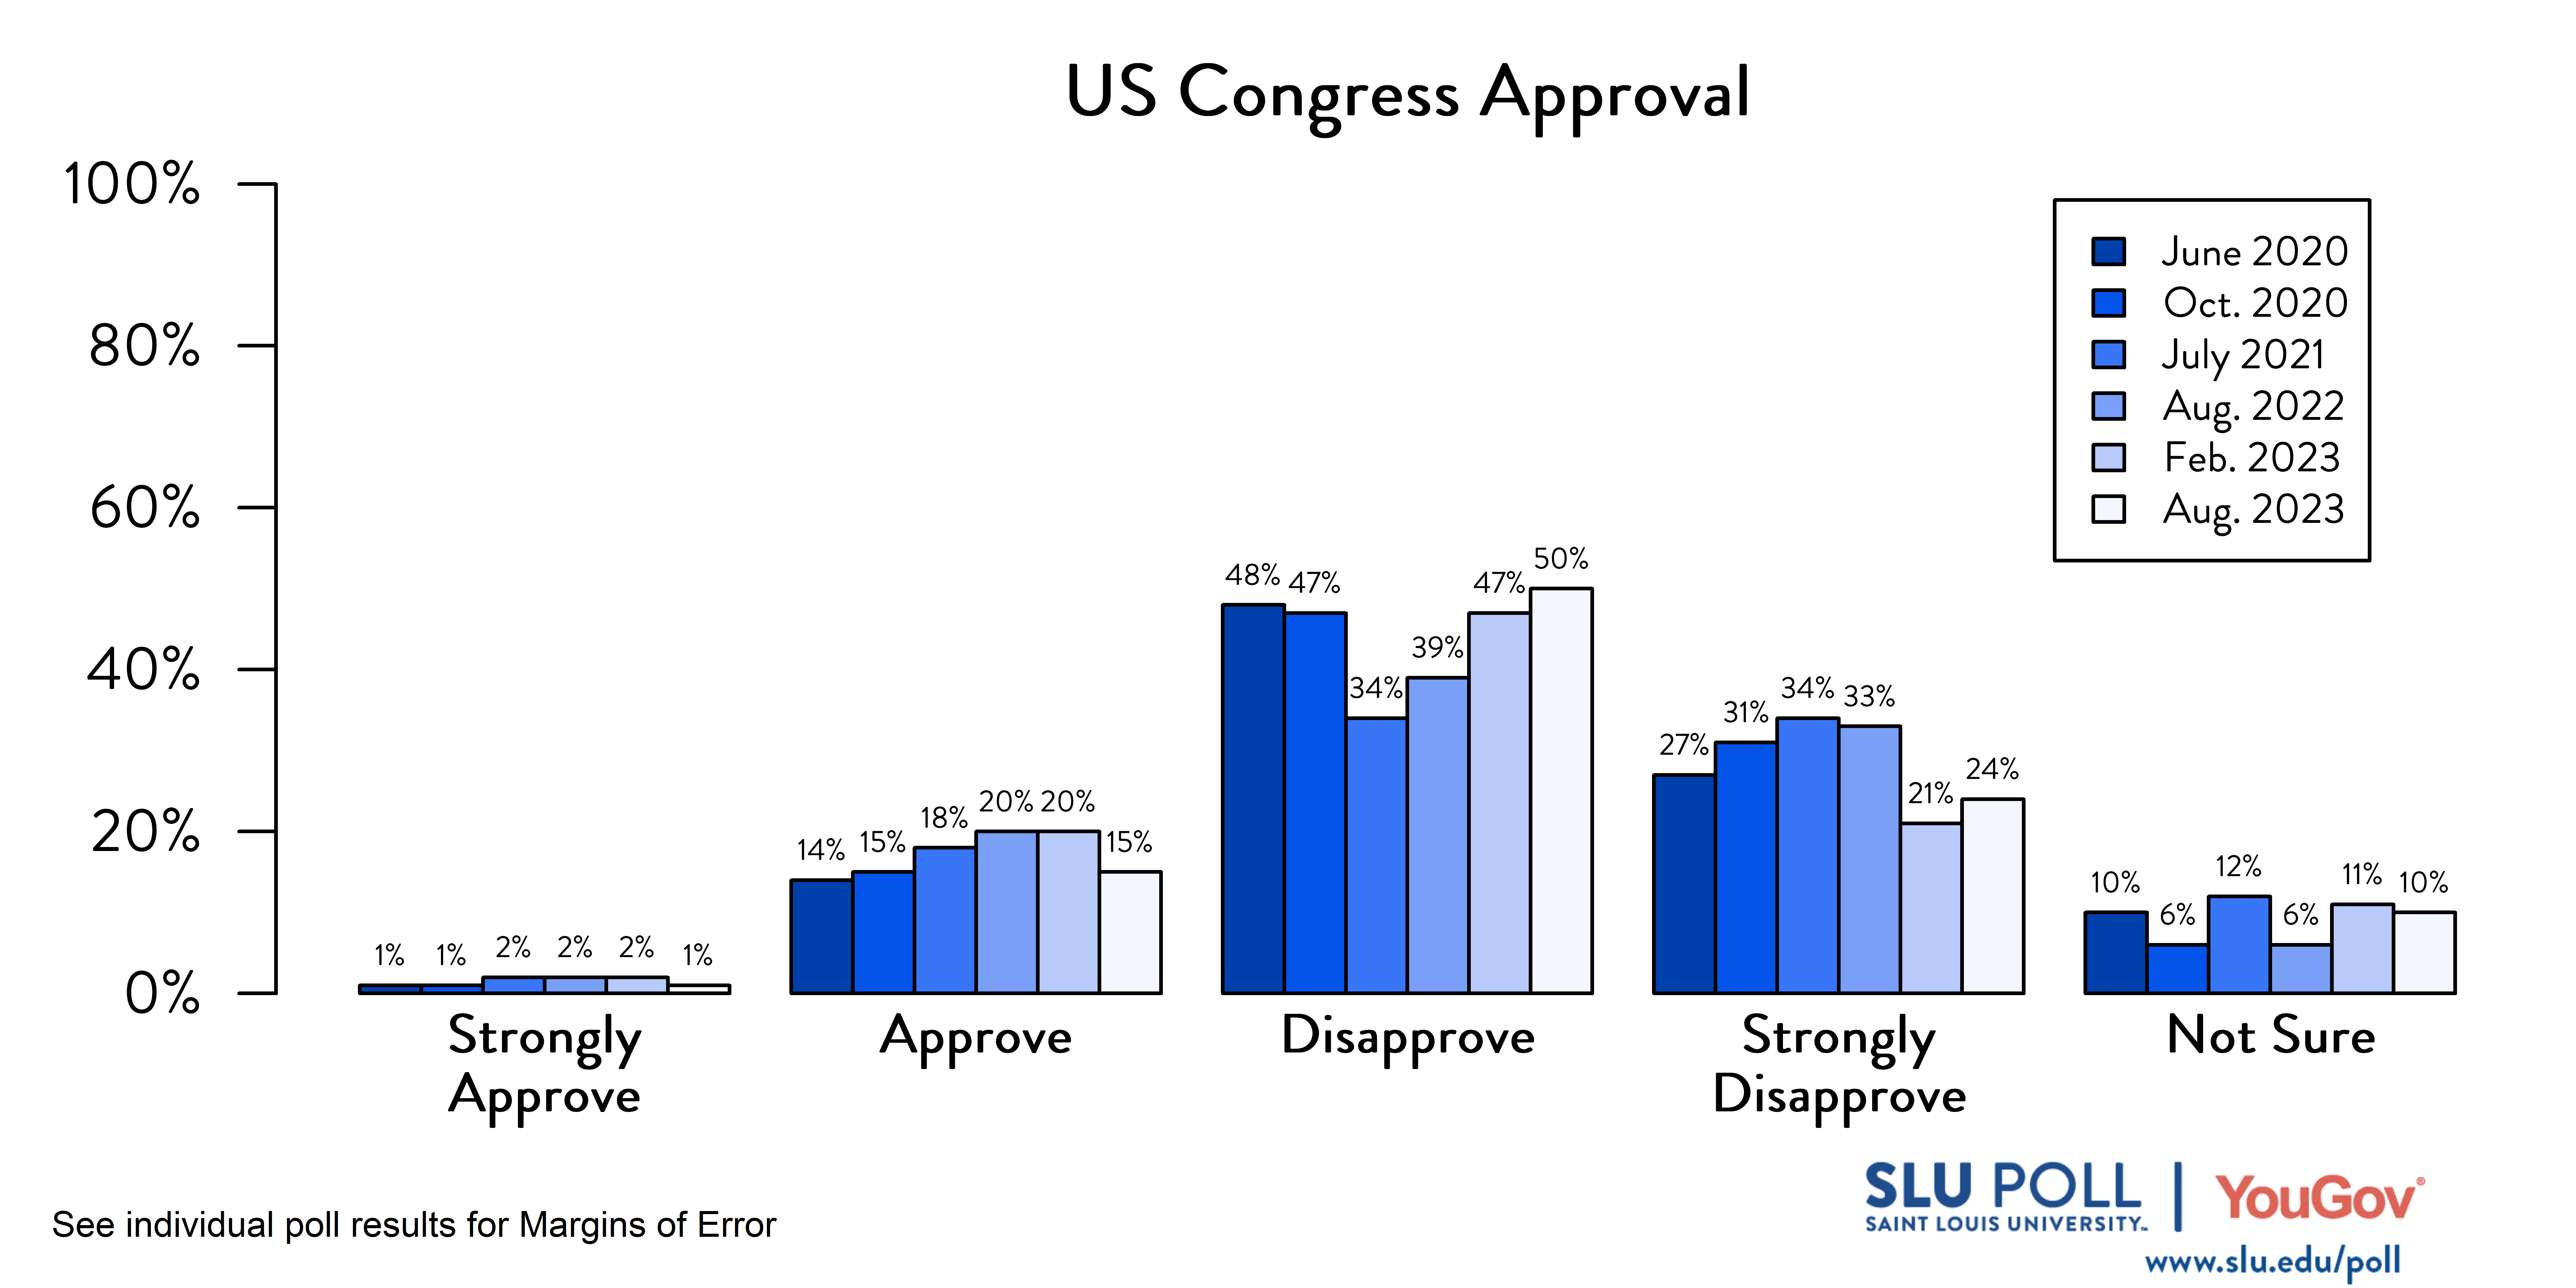 Likely voters' responses to 'Do you approve or disapprove of the way each is doing their job: The US Congress?'. June 2020 Voter Responses 1% Strongly Approve, 14% Approve, 48% Disapprove, 27% Strongly Disapprove, and 10% Not sure. October 2020 Voter Responses: 1% Strongly approve, 15% Approve, 47% Disapprove, 31% Strongly disapprove, and 6% Not sure. July 2021 Voter Responses: 2% Strongly approve, 18% Approve, 34% Disapprove, 34% Strongly disapprove, and 12% Not sure. August 2022 Voter Responses: 2% Strongly approve, 20% Approve, 39% Disapprove, 33% Strongly disapprove, and 6% Not sure. February 2023 Voter Responses: 2% Strongly approve, 20% Approve, 47% Disapprove, 21% Strongly disapprove, and 11% Not sure. August 2023 Voter Responses: 1% Strongly approve, 15% Approve, 50% Disapprove, 24% Strongly disapprove, and 10% Not sure.